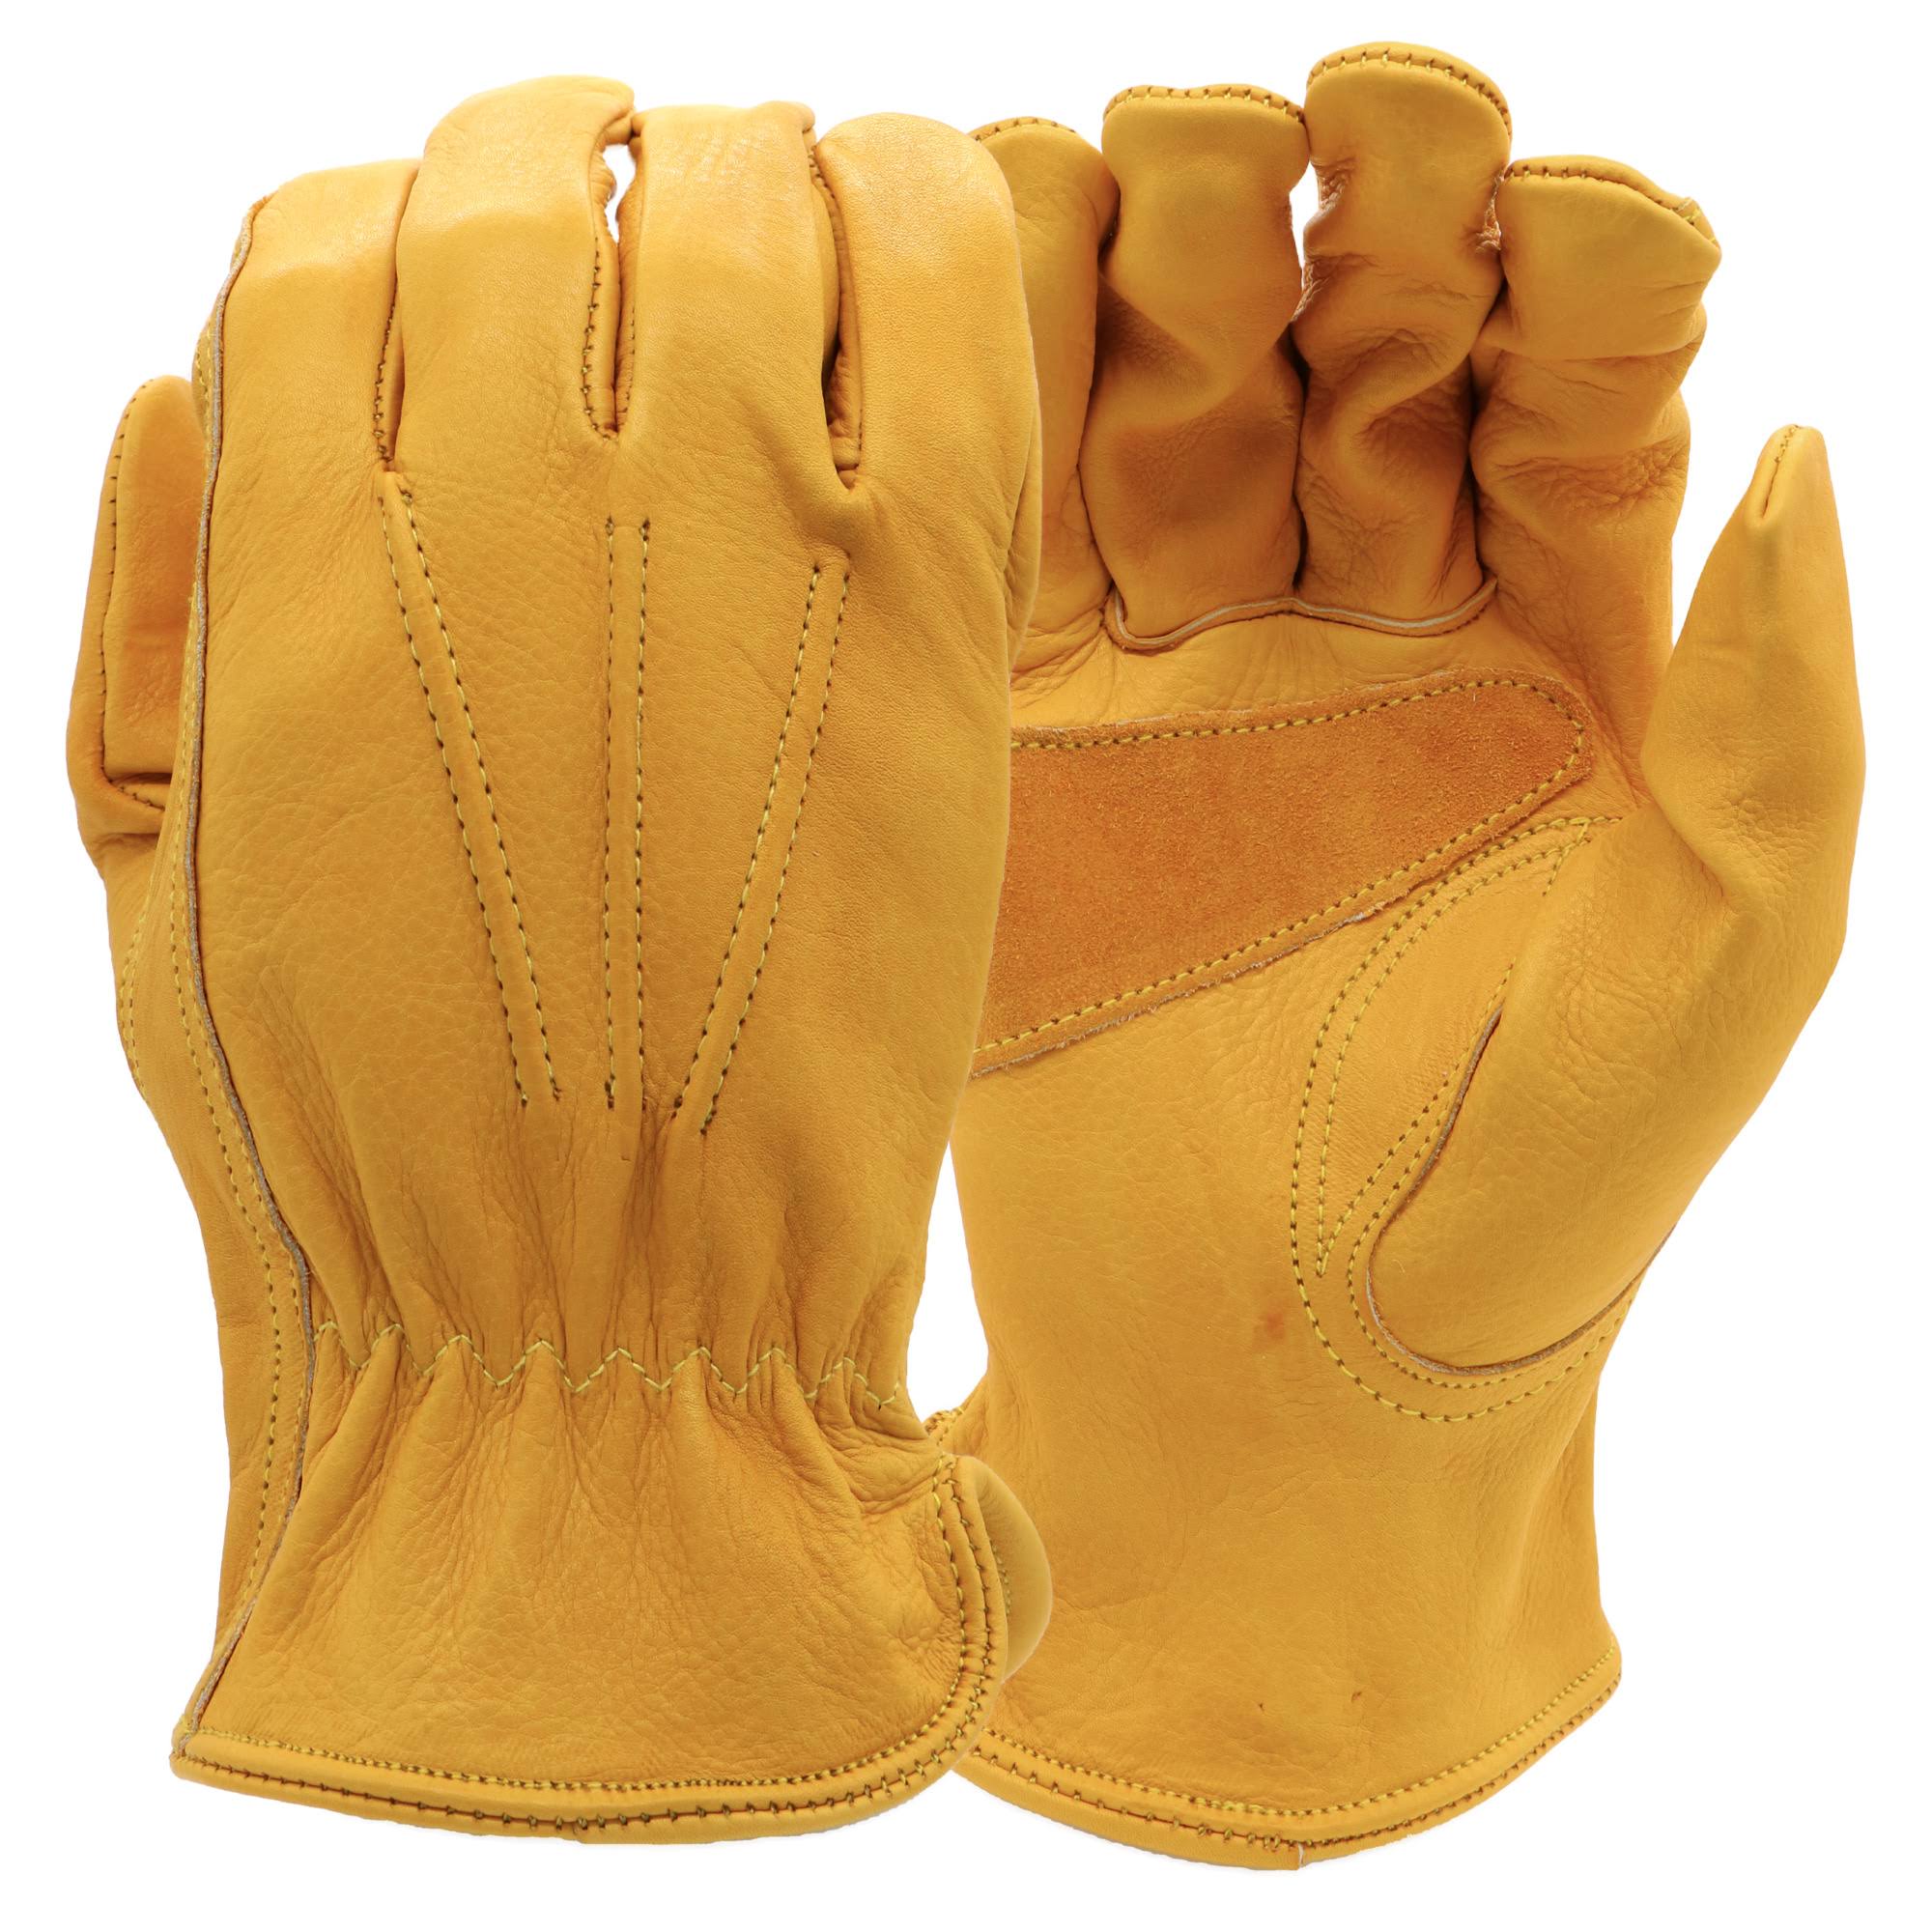 Boss B81001 Cowhide Leather Driver Work Gloves, Yellow, Large